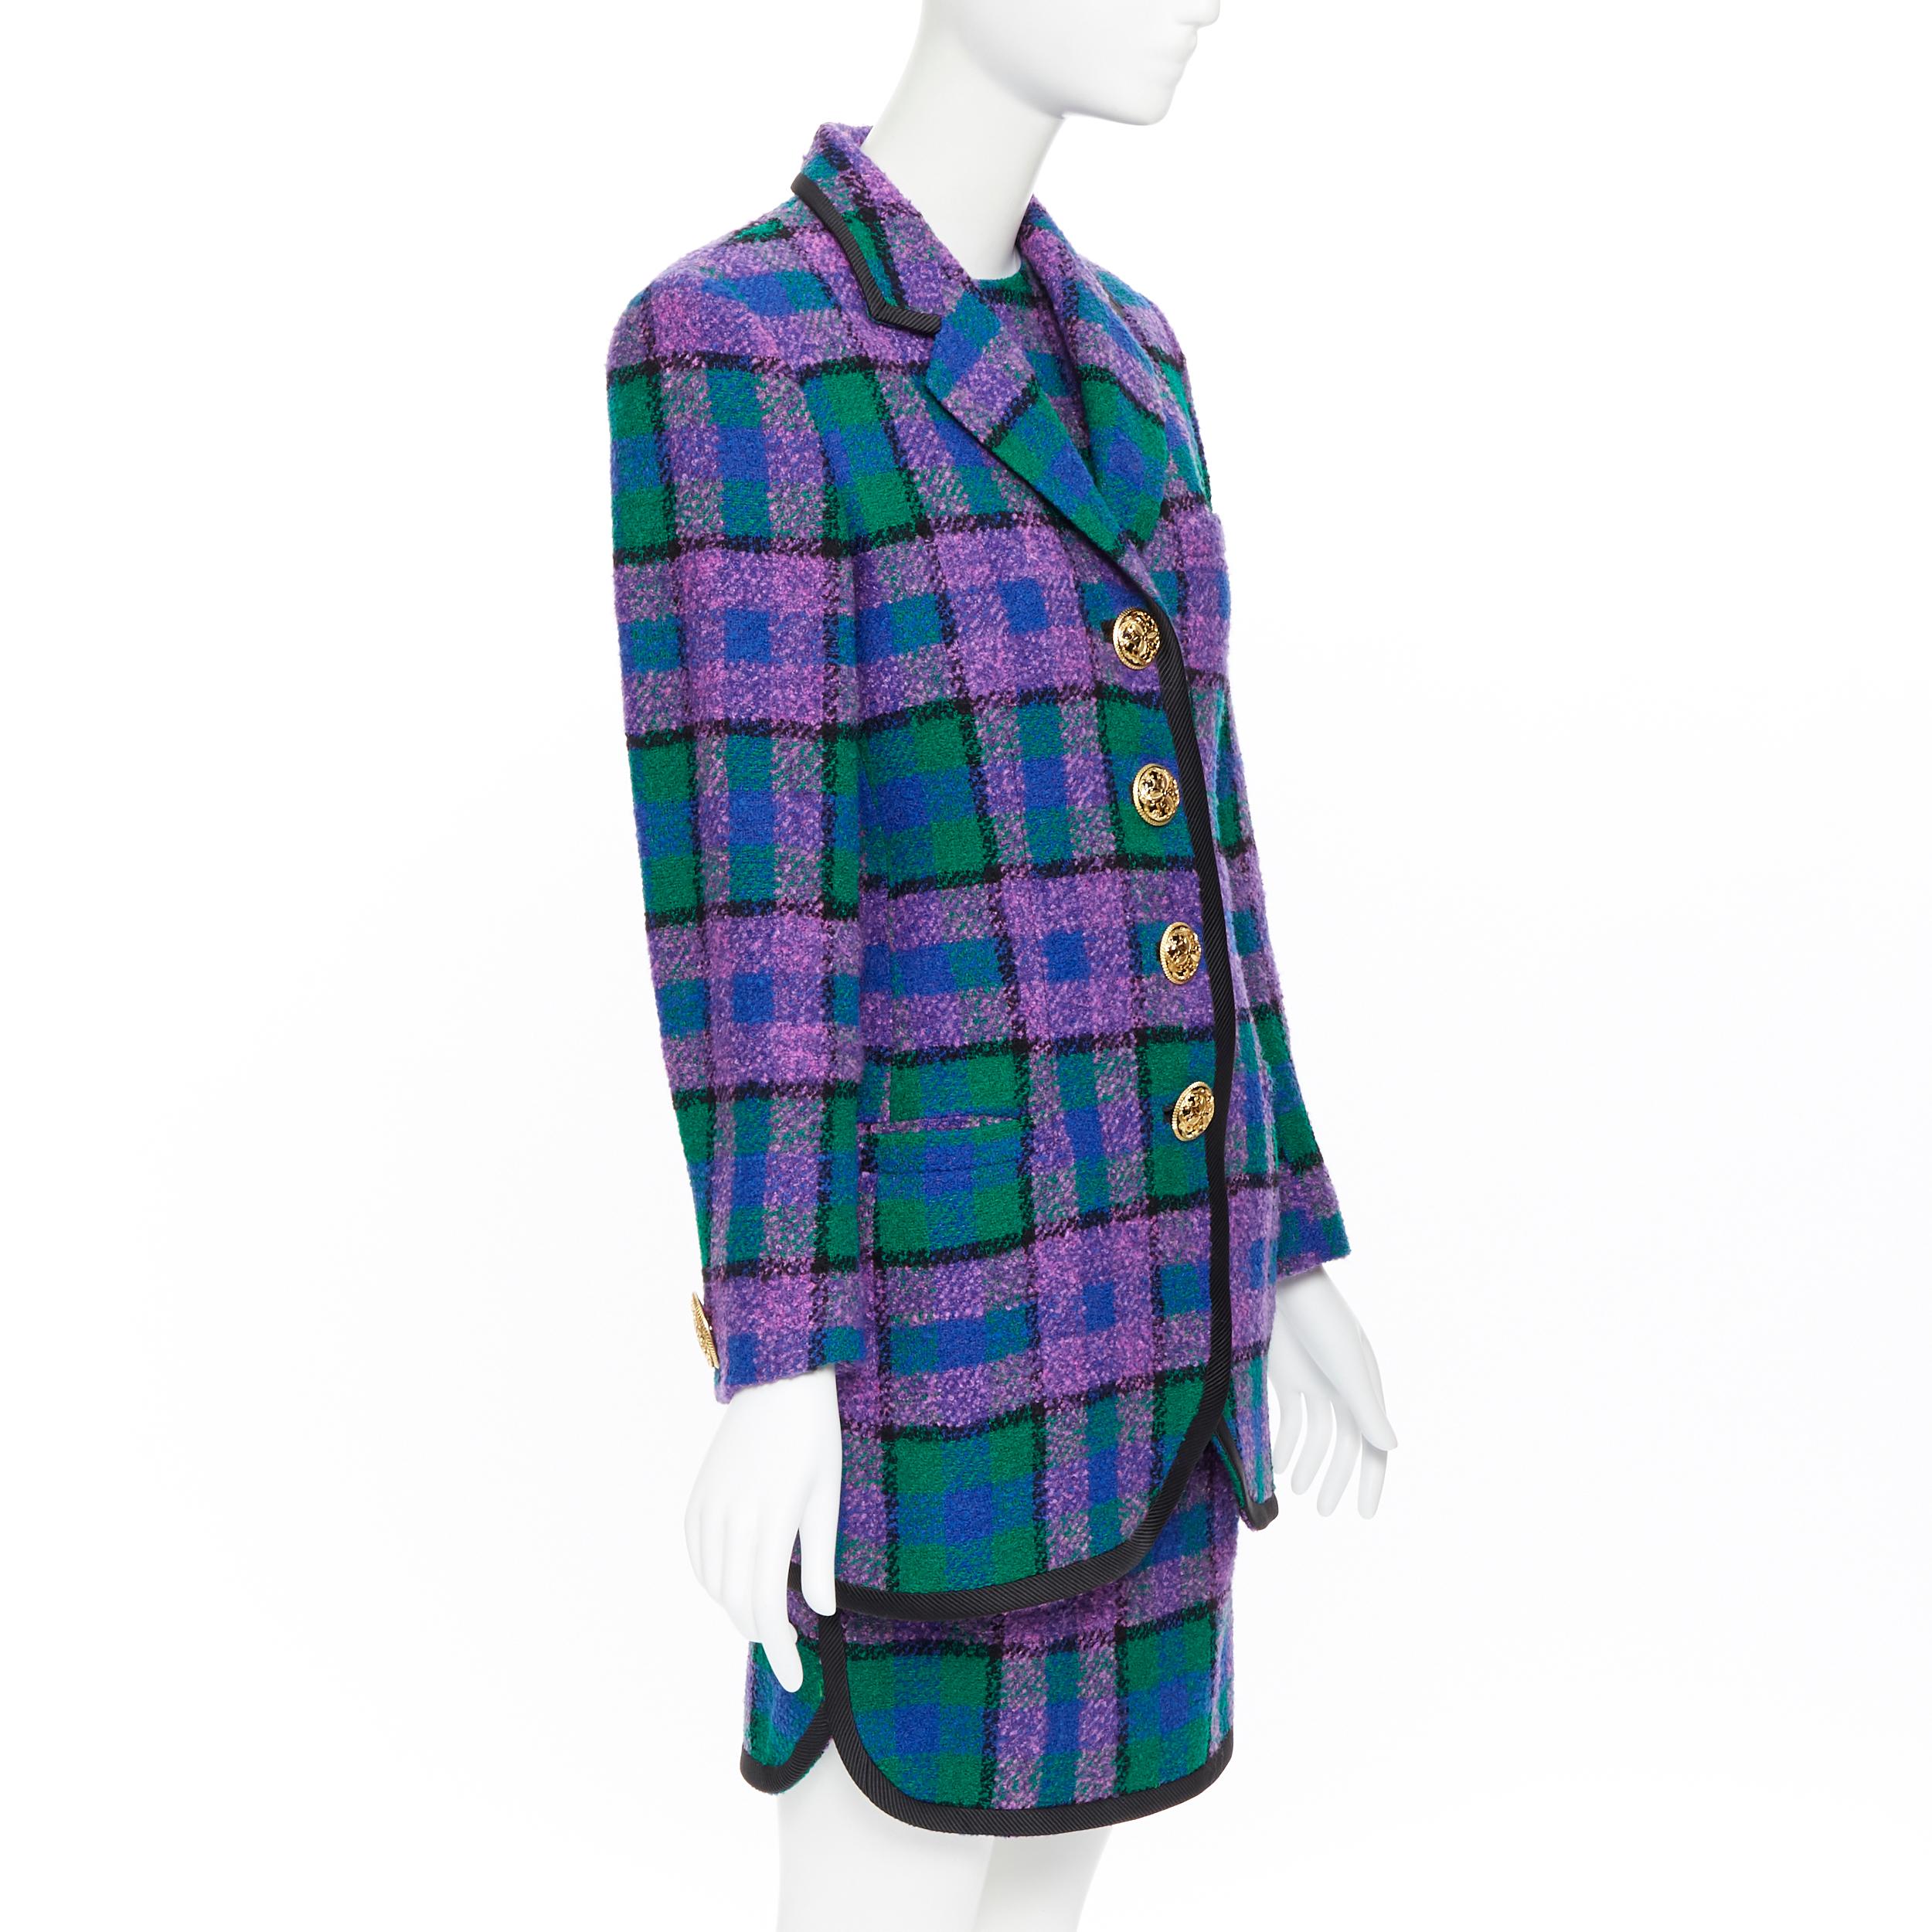 GIANNI VERSACE 1991 Vintage purple checked gold baroque button jacket skirt suit 1